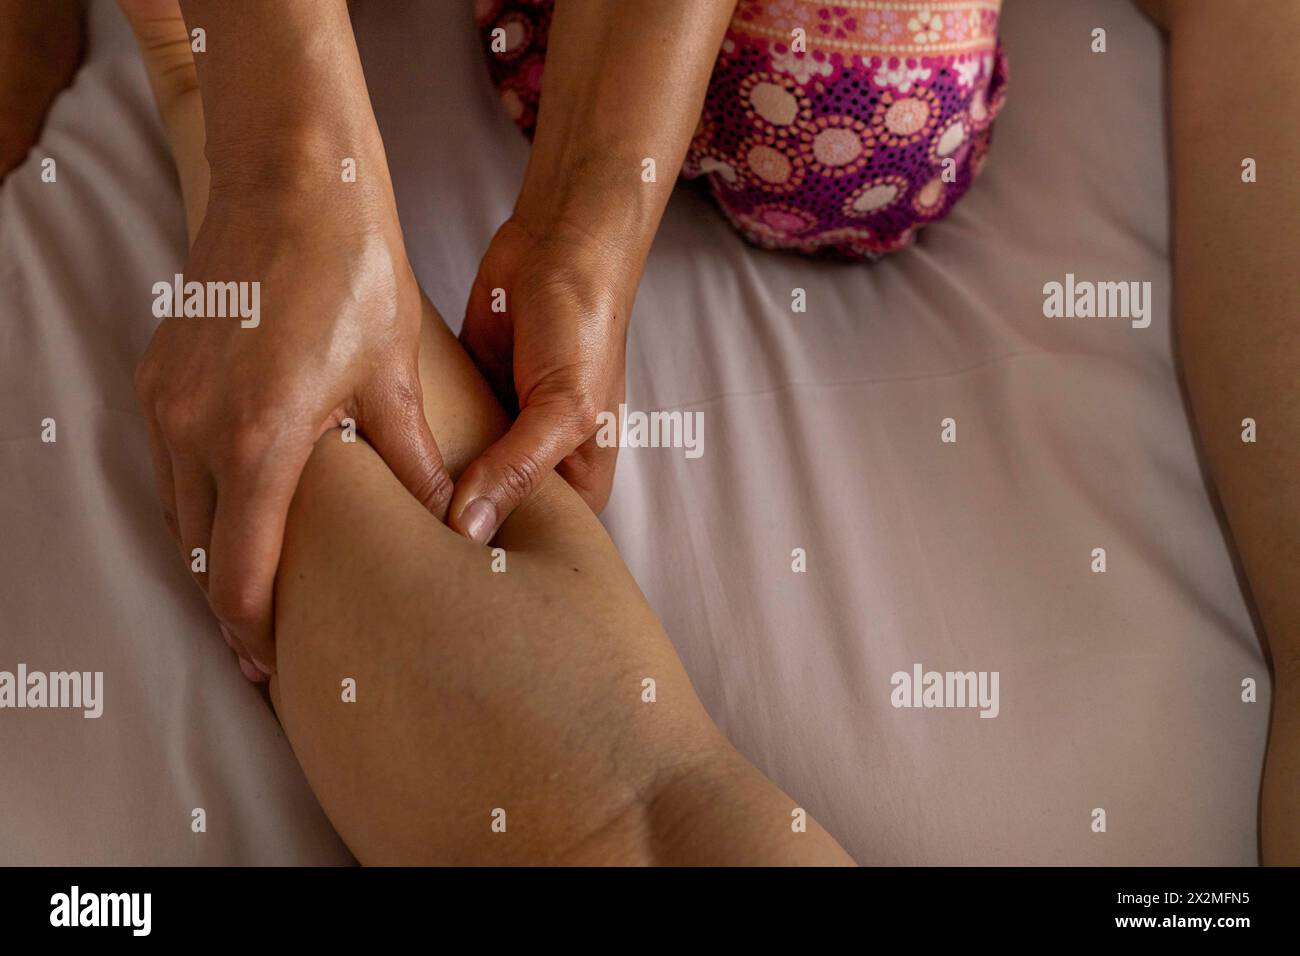 Latina woman lying on her back receives an ayurvedic massage treatment on her calf, foreground hands of a woman masseuse. Healing massage concept Stock Photo